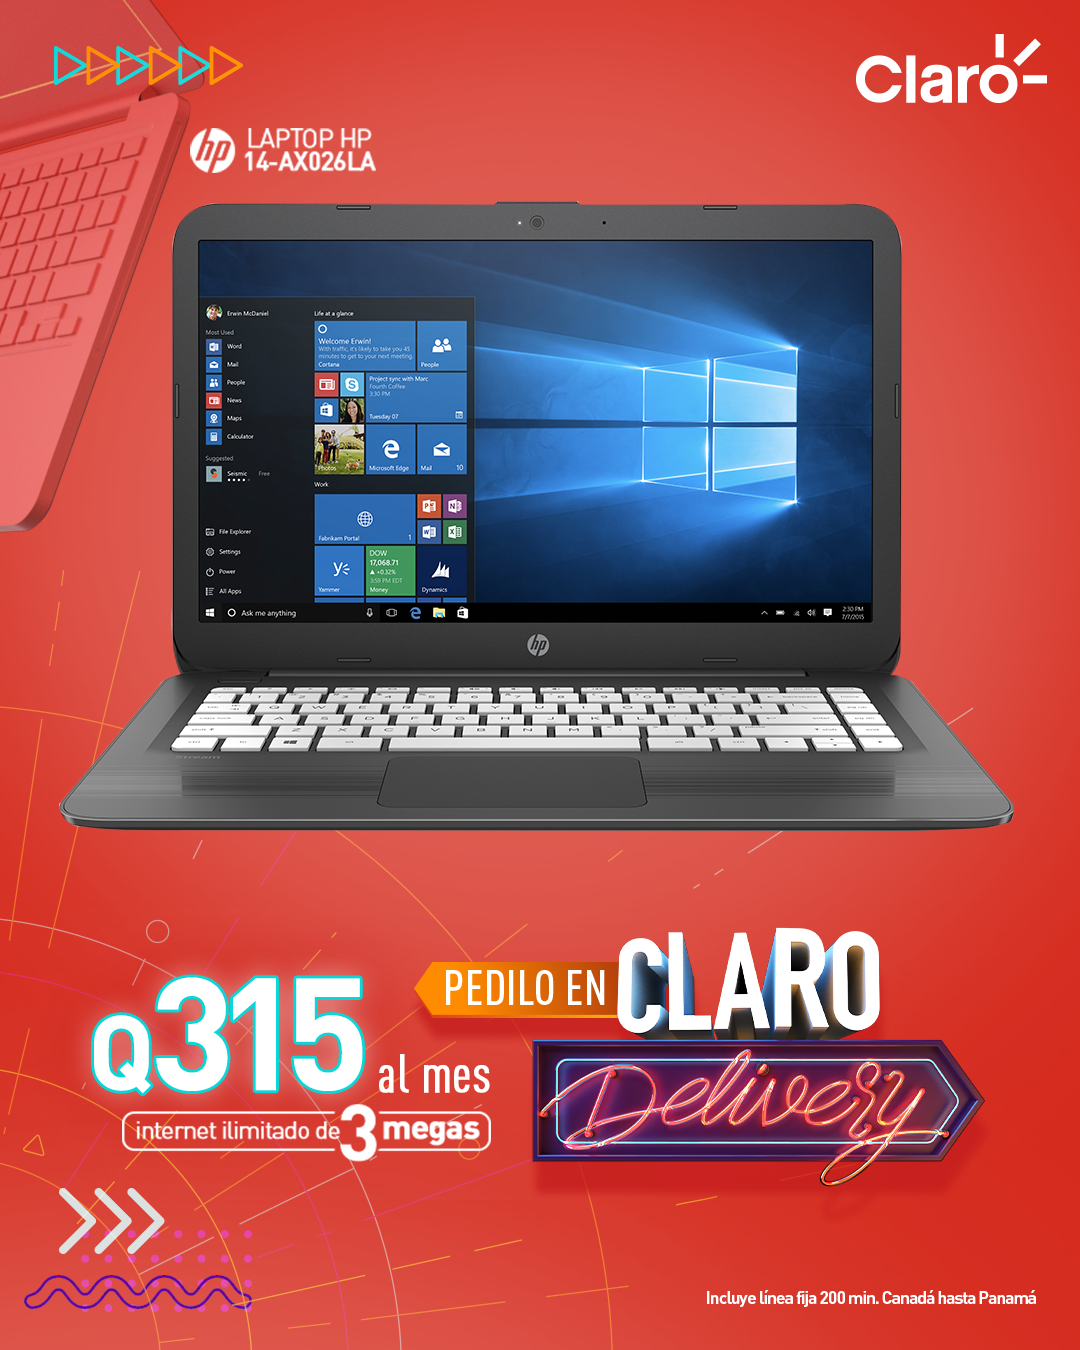 claro delivery Laptop phone red switch